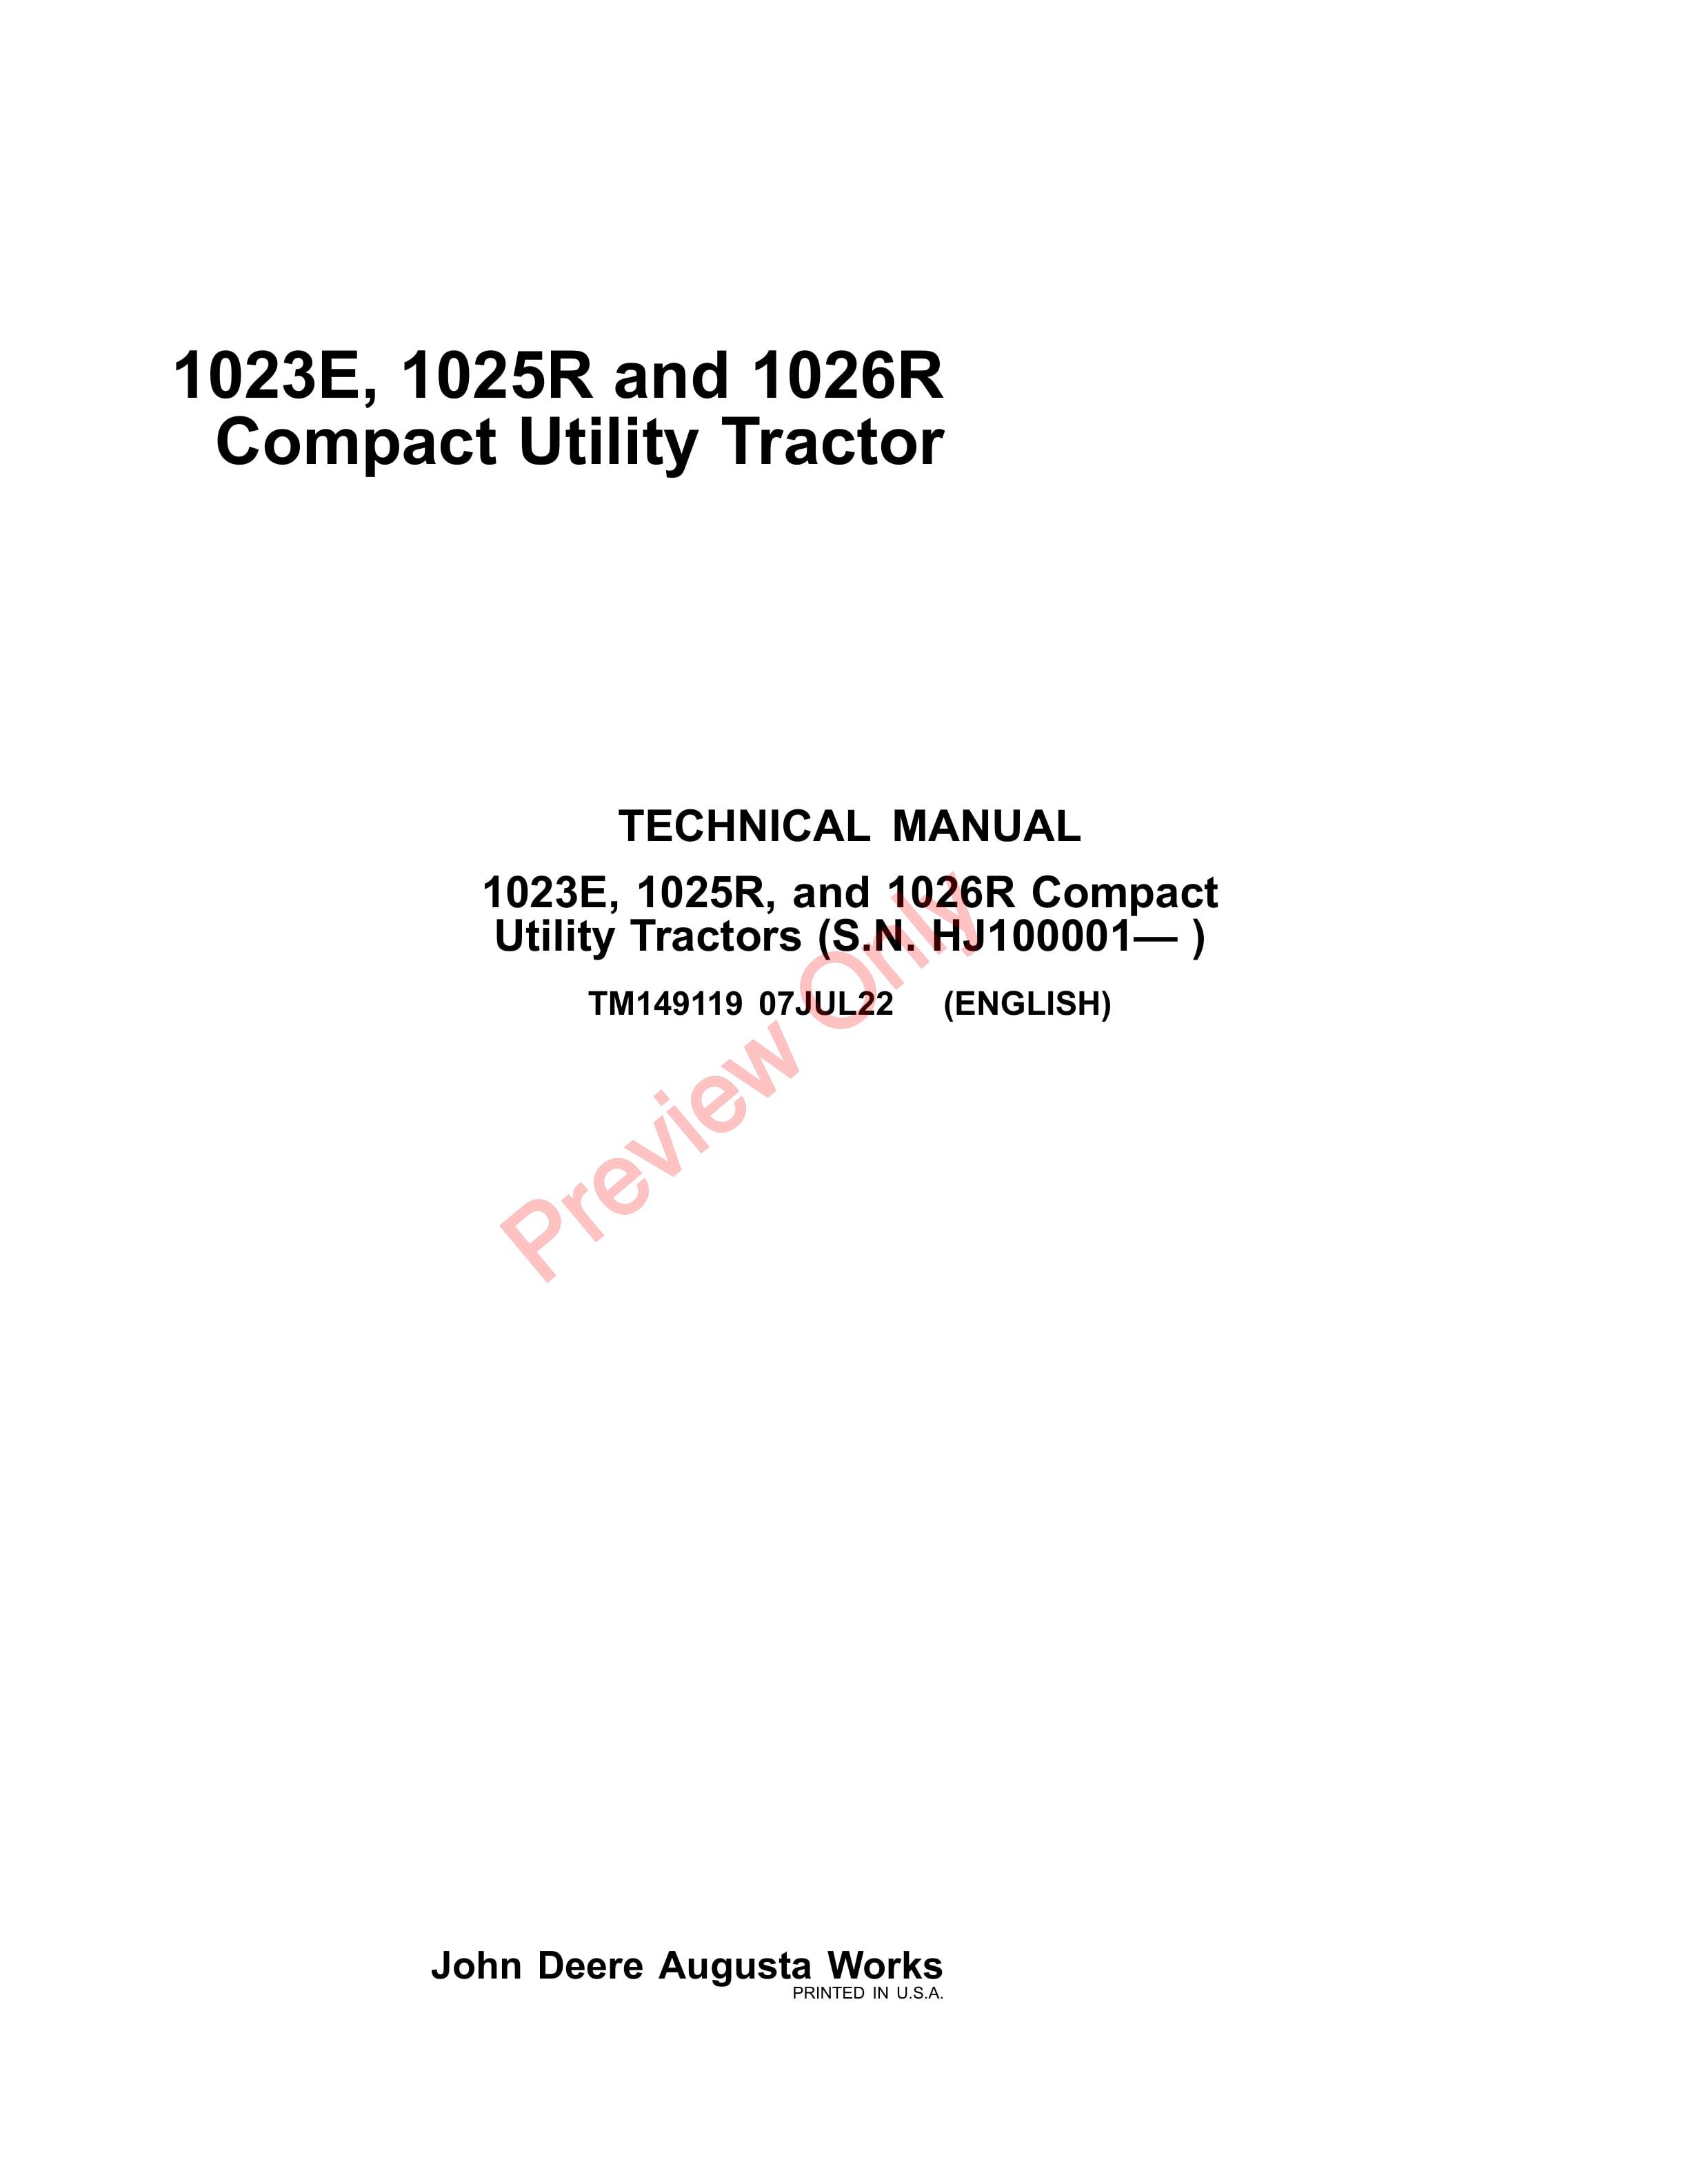 John Deere 1023E 1025R and 1026R Compact Utility Tractor Technical Manual TM149119 07JUL22 1